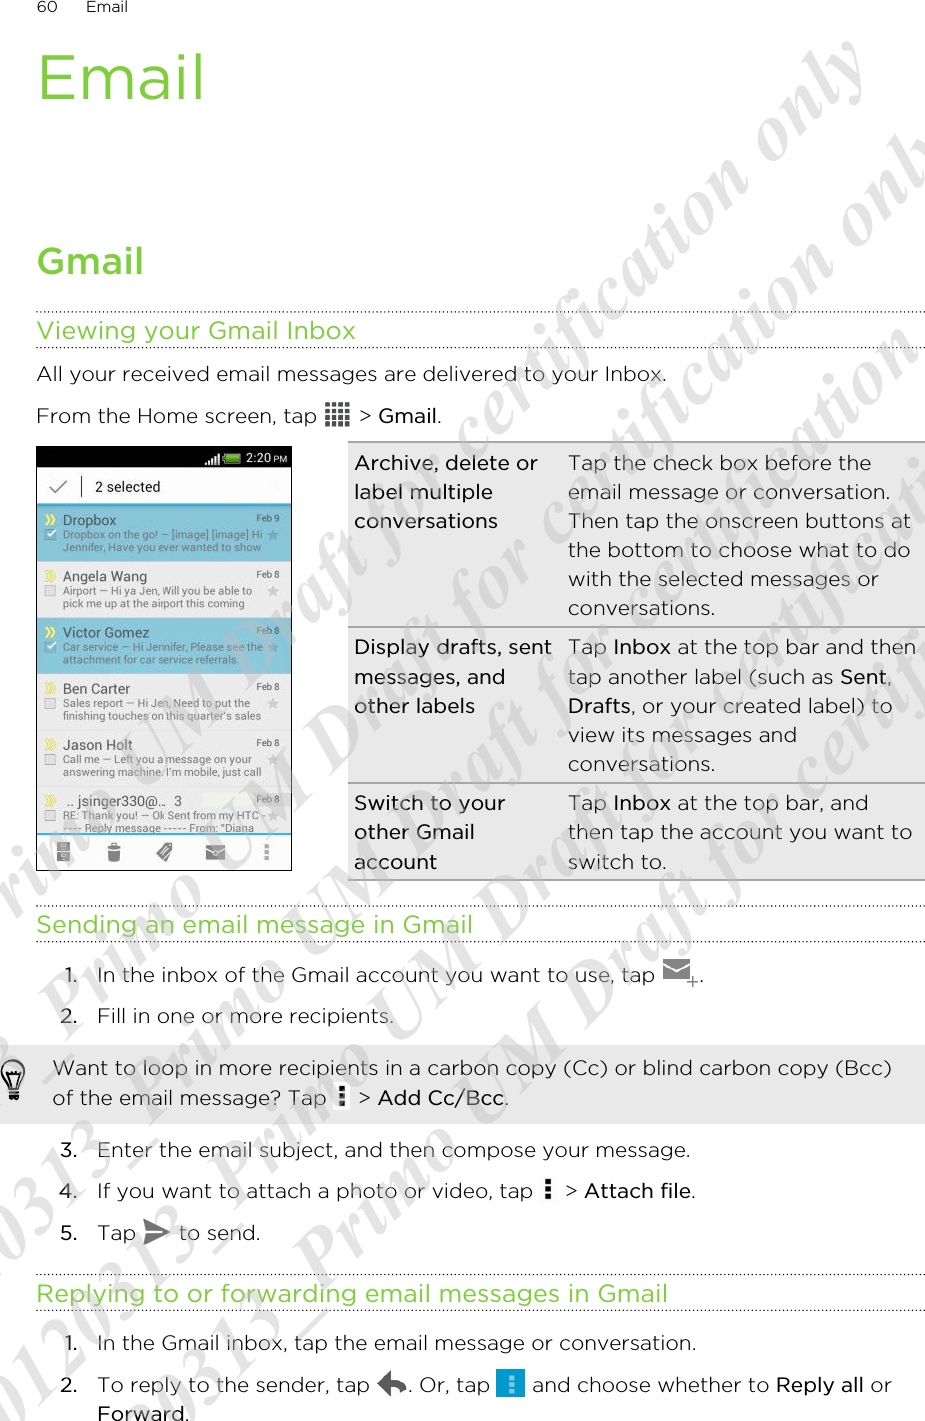 EmailGmailViewing your Gmail InboxAll your received email messages are delivered to your Inbox.From the Home screen, tap   &gt; Gmail. Archive, delete orlabel multipleconversationsTap the check box before theemail message or conversation.Then tap the onscreen buttons atthe bottom to choose what to dowith the selected messages orconversations.Display drafts, sentmessages, andother labelsTap Inbox at the top bar and thentap another label (such as Sent,Drafts, or your created label) toview its messages andconversations.Switch to yourother GmailaccountTap Inbox at the top bar, andthen tap the account you want toswitch to.Sending an email message in Gmail1. In the inbox of the Gmail account you want to use, tap  .2. Fill in one or more recipients. Want to loop in more recipients in a carbon copy (Cc) or blind carbon copy (Bcc)of the email message? Tap   &gt; Add Cc/Bcc.3. Enter the email subject, and then compose your message.4. If you want to attach a photo or video, tap   &gt; Attach file.5. Tap   to send.Replying to or forwarding email messages in Gmail1. In the Gmail inbox, tap the email message or conversation.2. To reply to the sender, tap  . Or, tap   and choose whether to Reply all orForward.60 Email20120313_Primo UM Draft for certification only 20120313_Primo UM Draft for certification only 20120313_Primo UM Draft for certification only 20120313_Primo UM Draft for certification only 20120313_Primo UM Draft for certification only